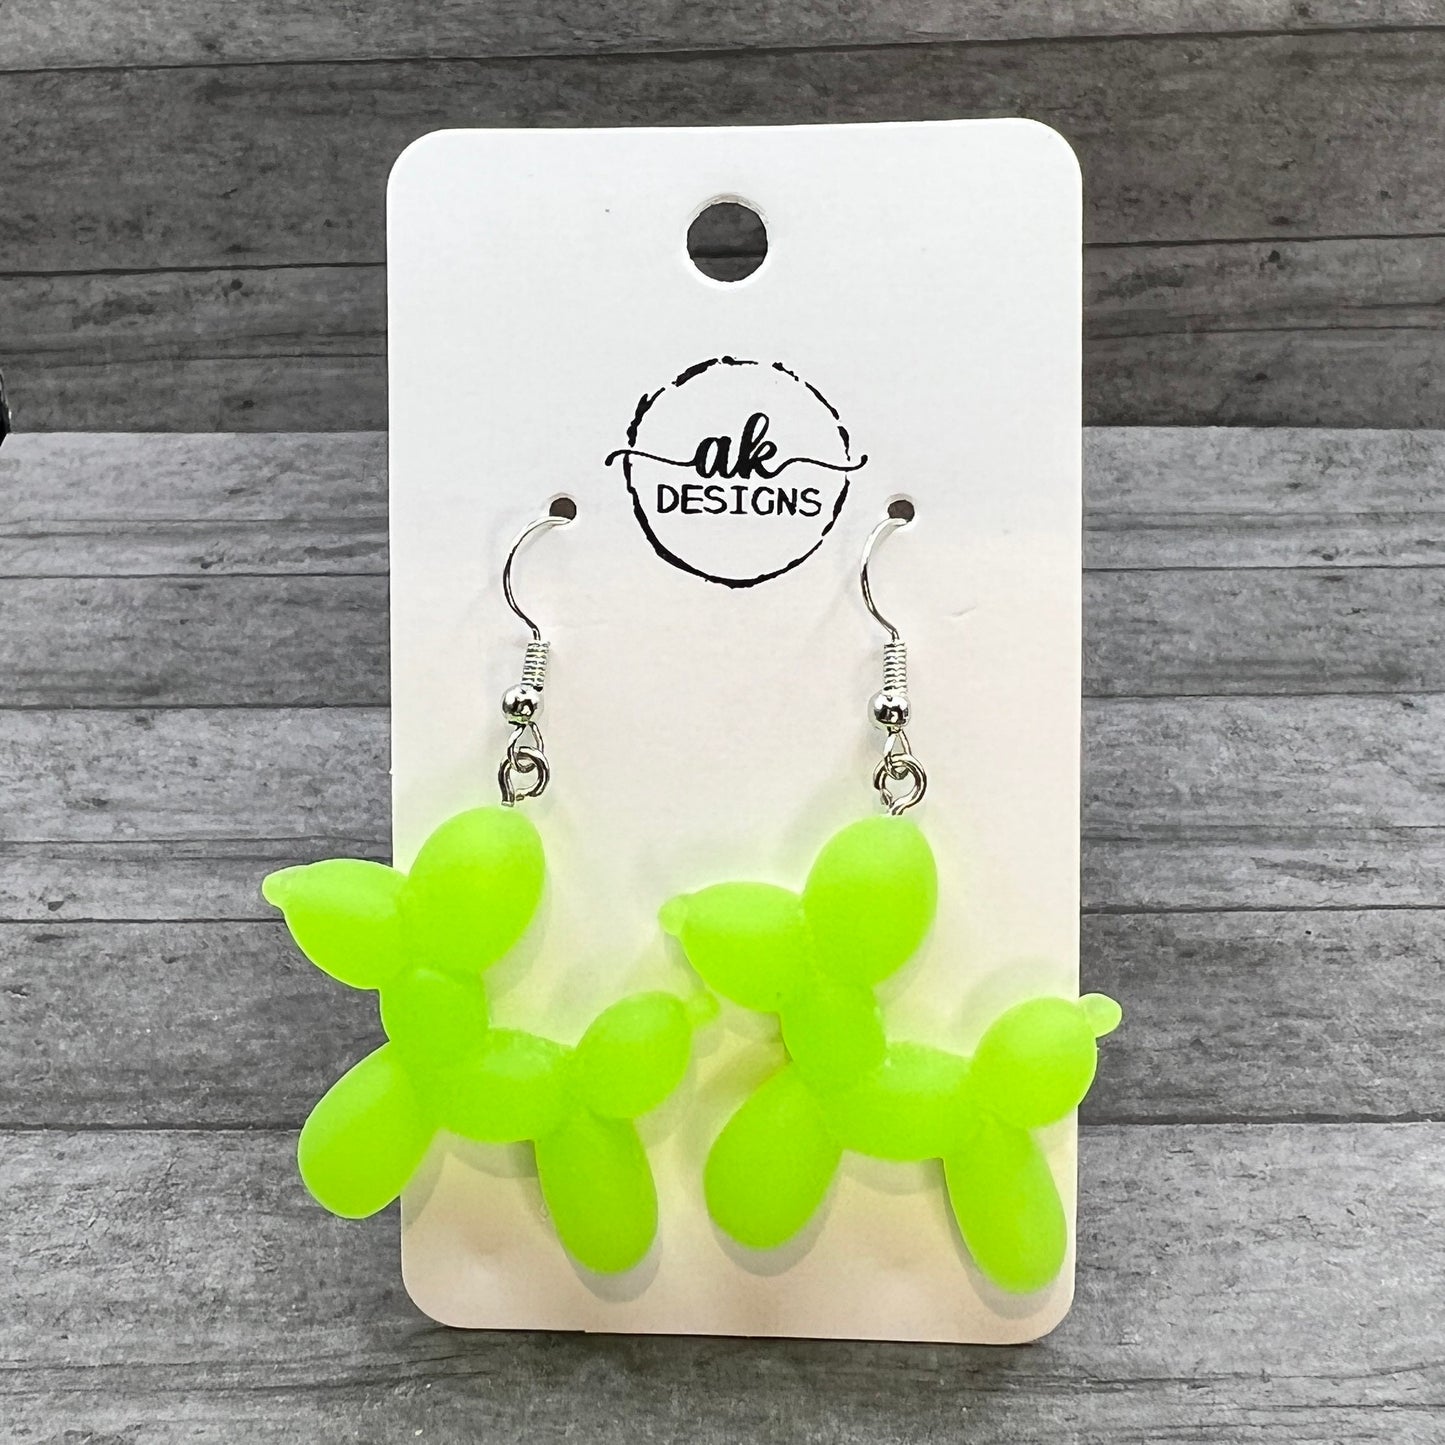 Fun and Whimsical Balloon Dog Earrings, Add Color to Your Style with These Resin Earrings, Perfect Gift for Her